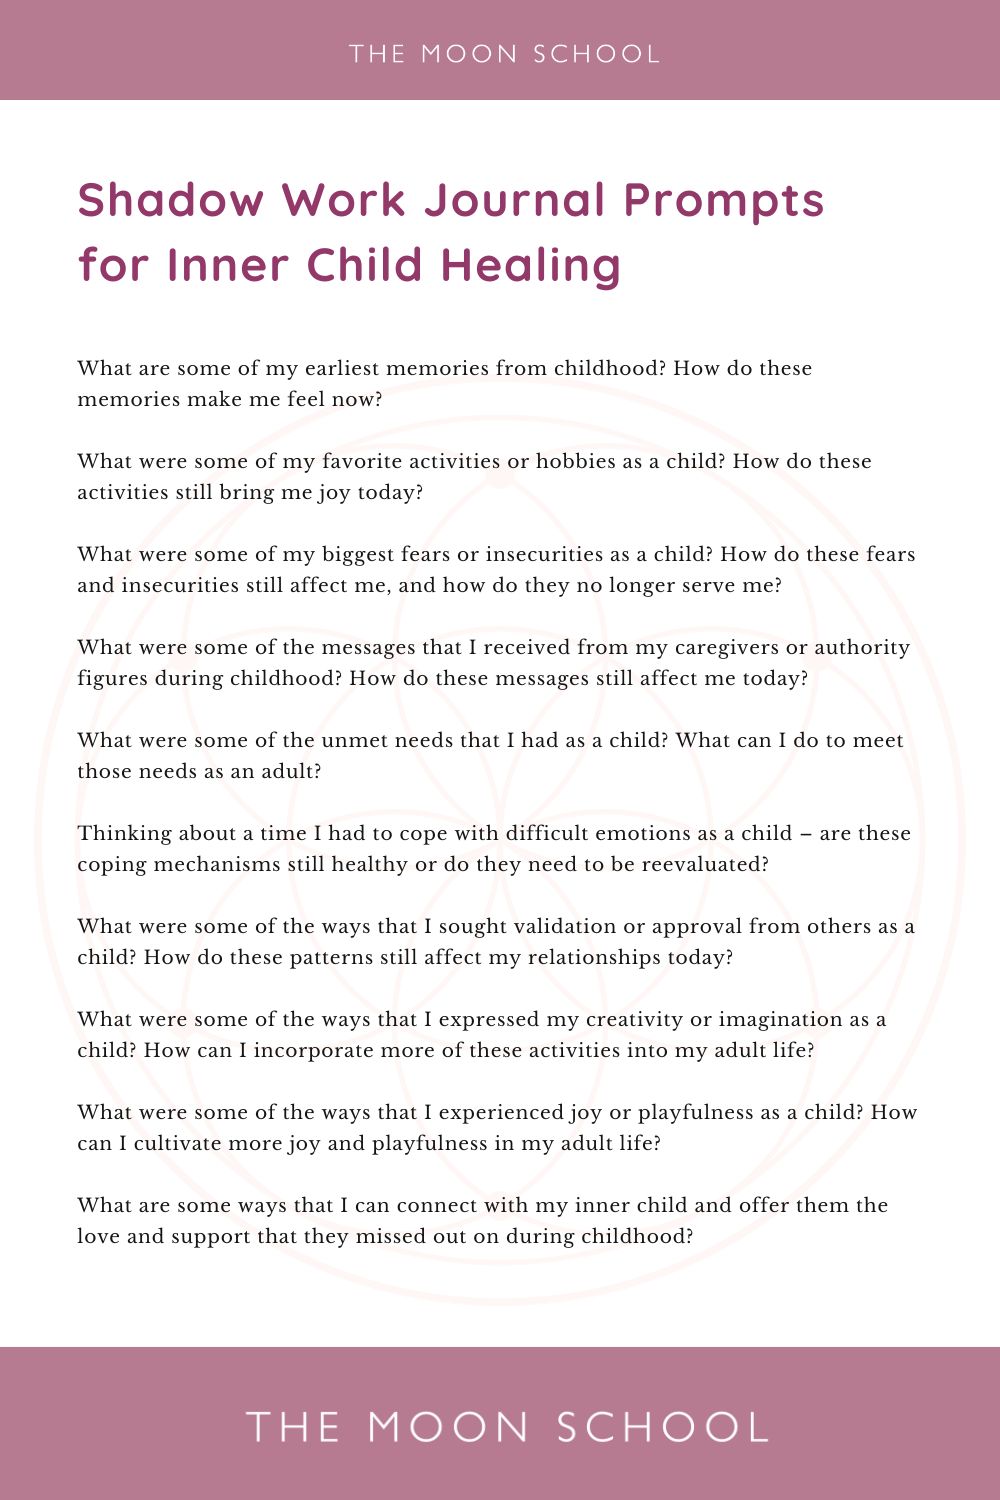 List of journal prompts to heal the inner child